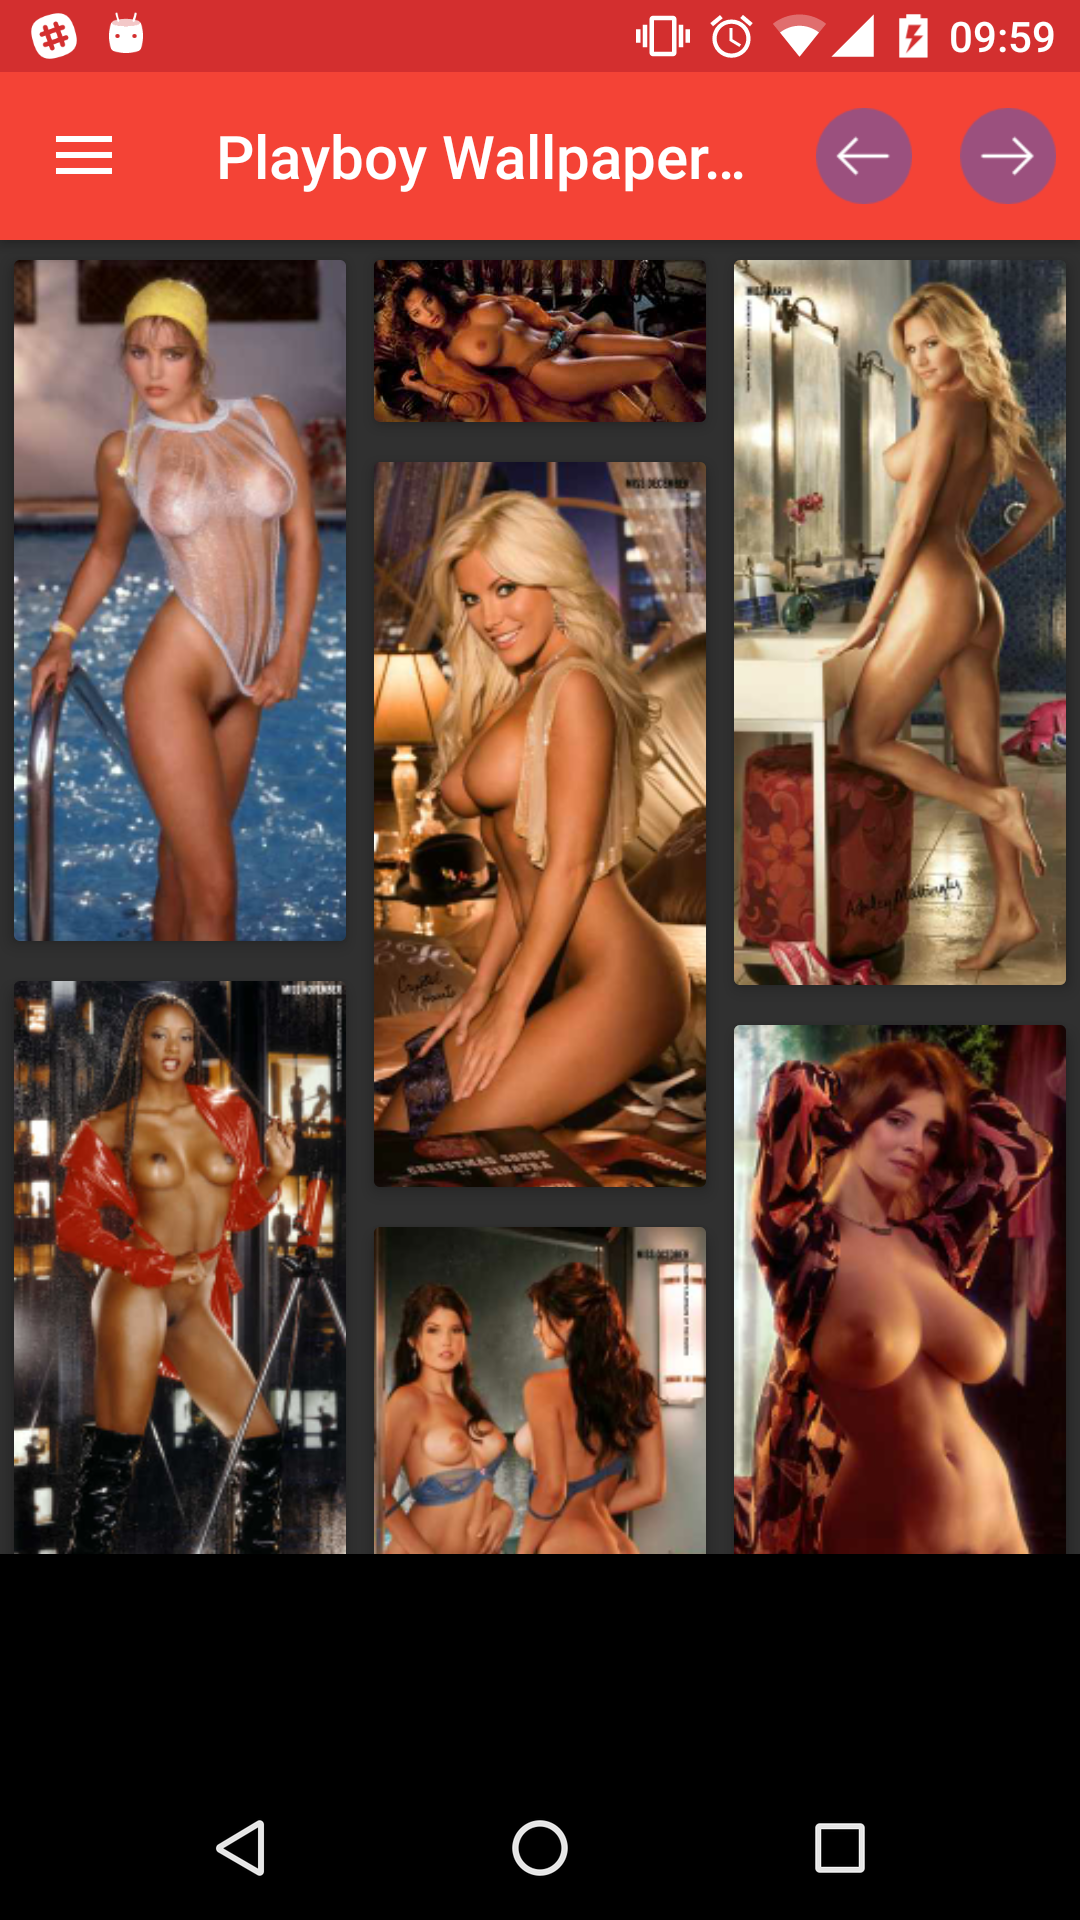 Playboy wallpapers maker,playboy,pictures,personalization,backgrounds,download,wallpapers,image,good,hentei,app,gallery,hentia,pornstar,sexy,android,erotic,porn,pics,best,photo,anime,hantai,browser,customization,magazine,apk,pic,centerfolds,hentai,hot